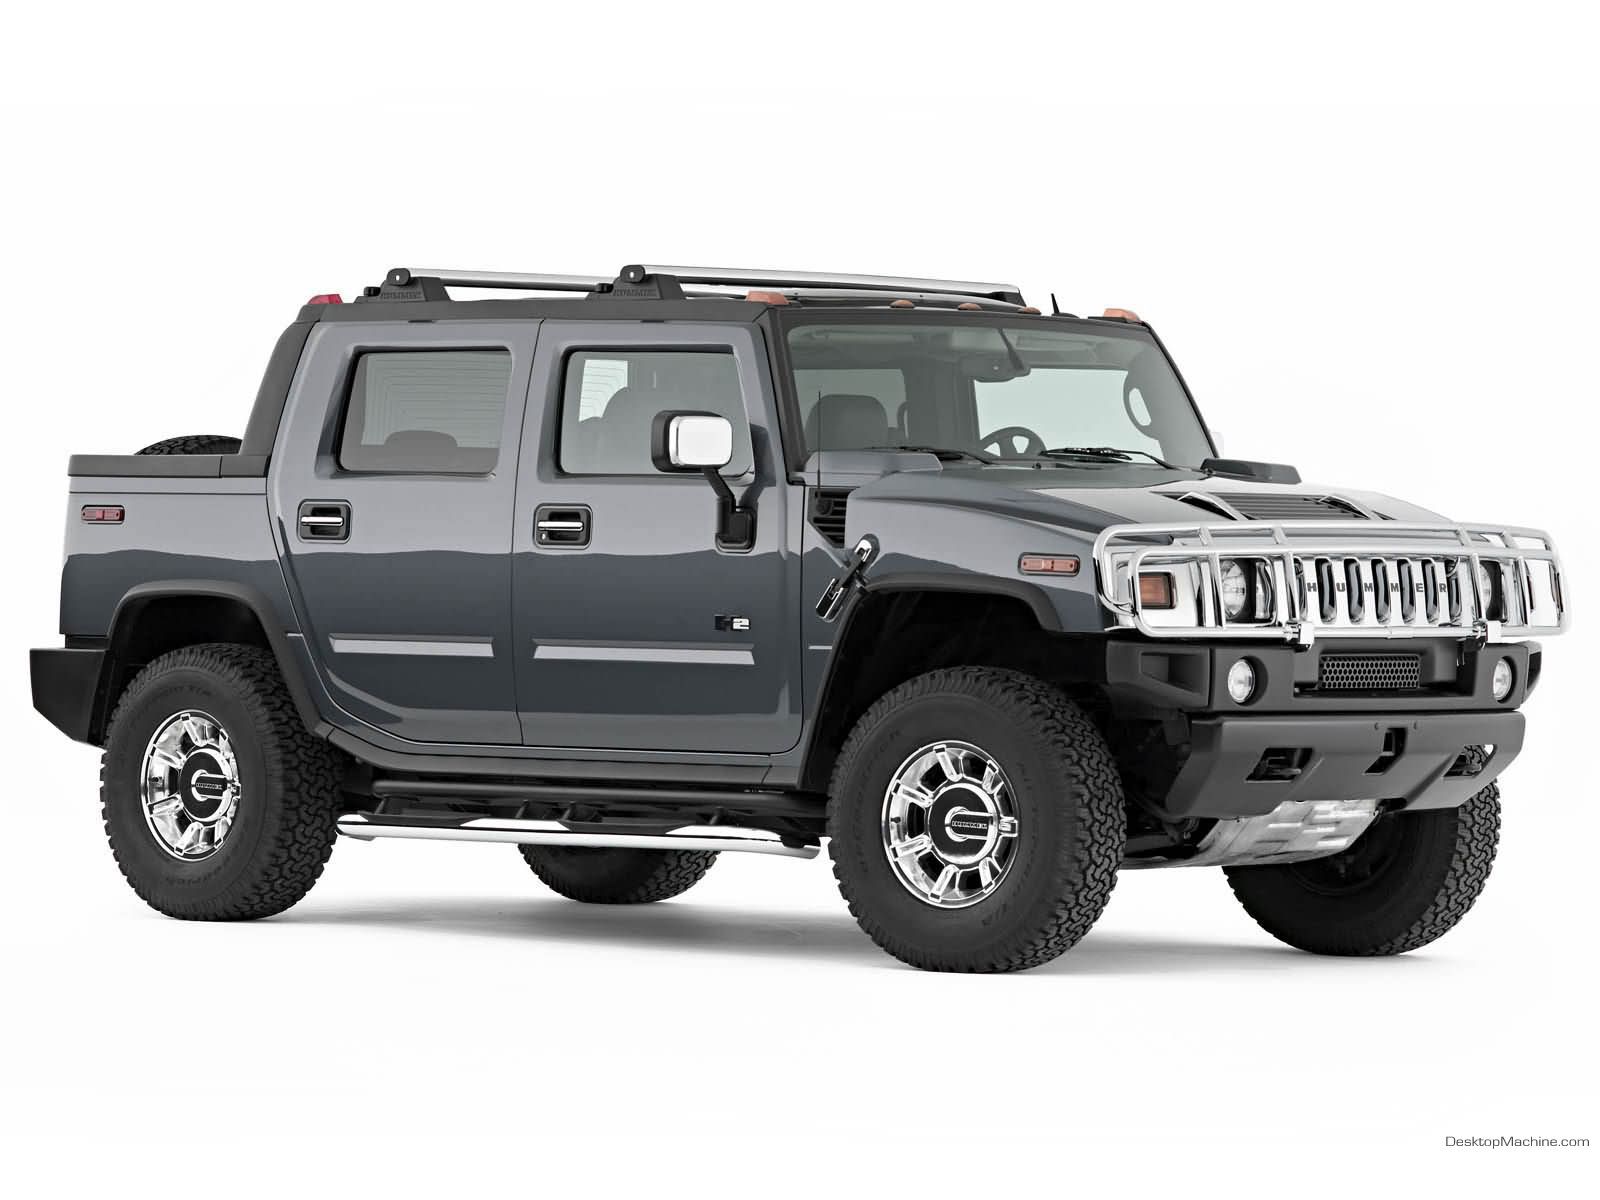 Hummer Jeep | Dream Cars | Pinterest | Hummer, Jeeps and Dream cars